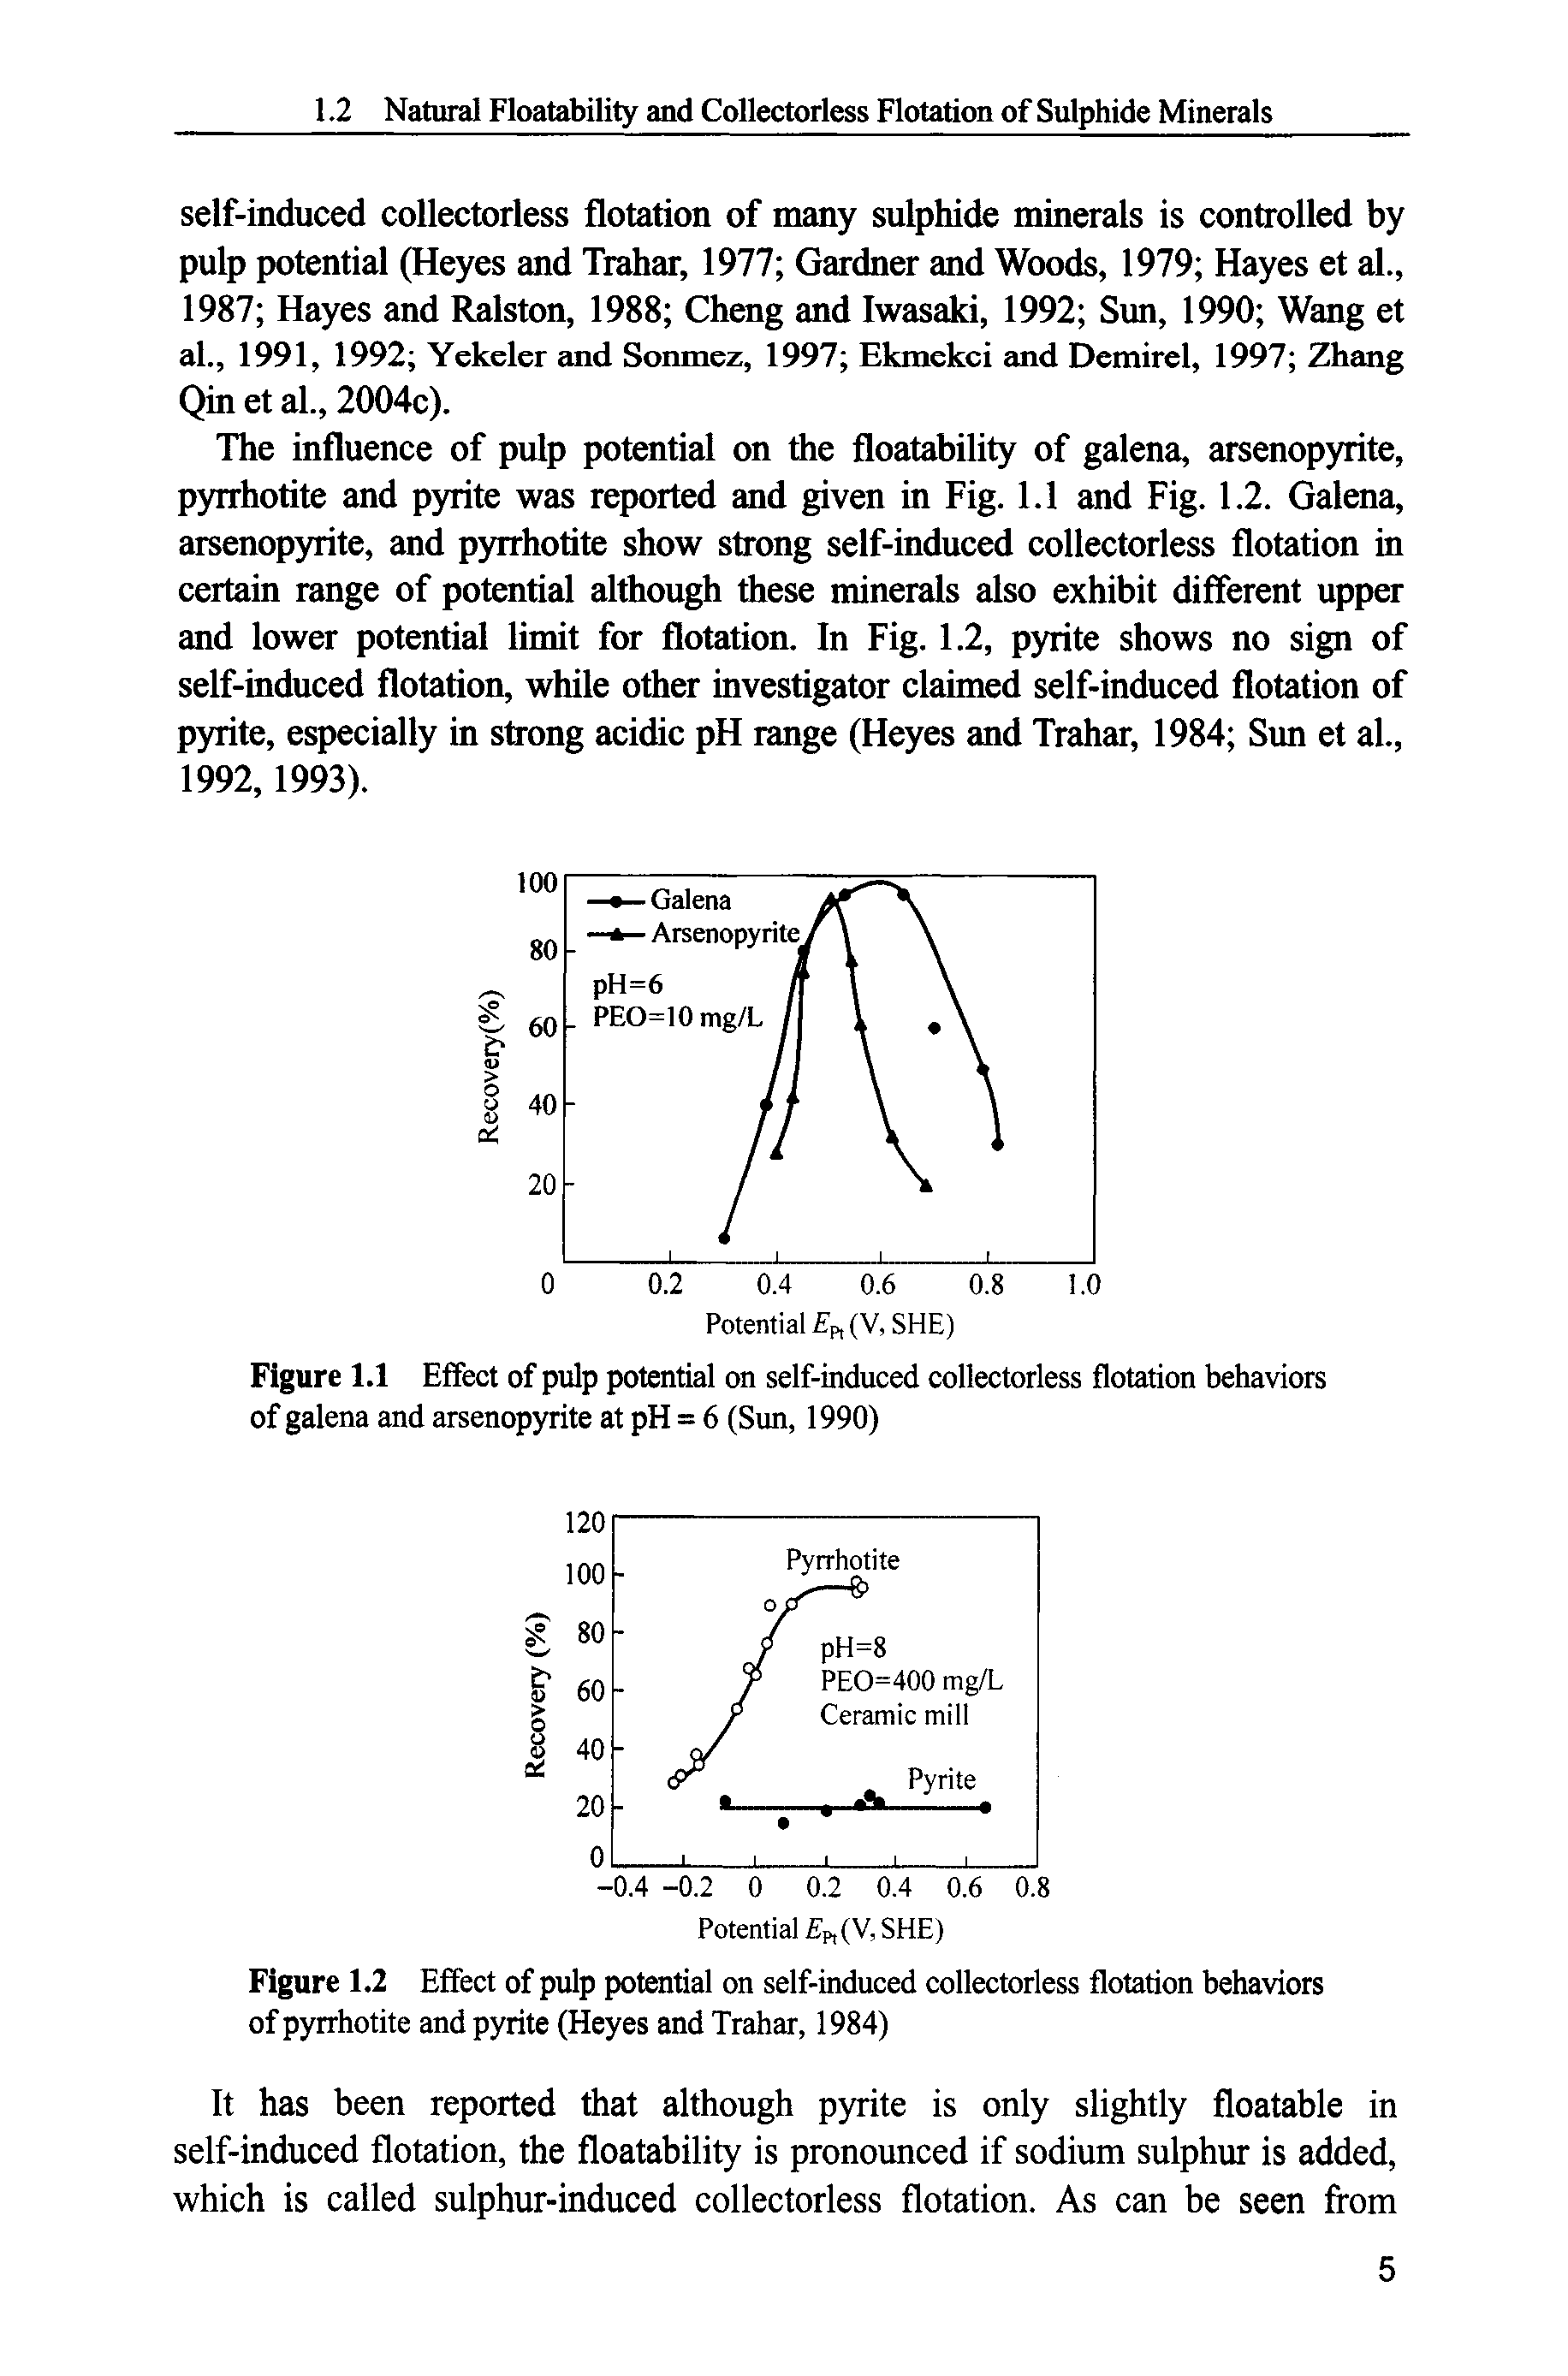 Figure 1.1 Effect of pulp potential on self-induced collectorless flotation behaviors of galena and arsenopyrite at pH = 6 (Sun, 1990)...